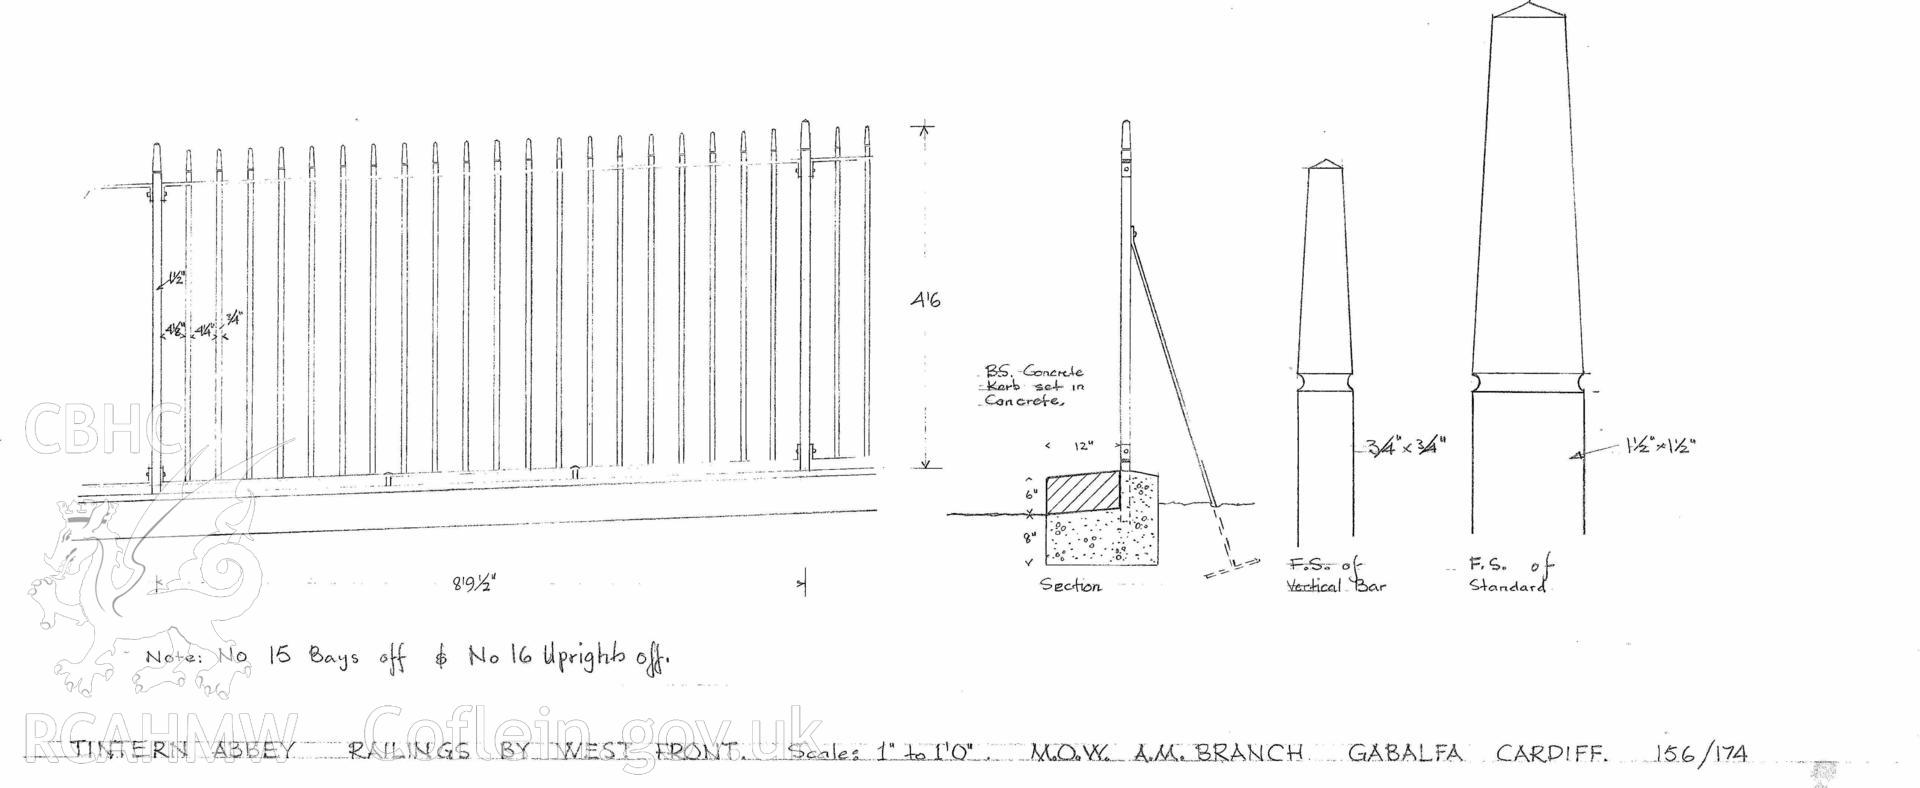 Cadw guardianship monument drawing of Tintern Abbey. Railings by West front + photocopy. Cadw ref. No. 156/174. Scale 1:12.